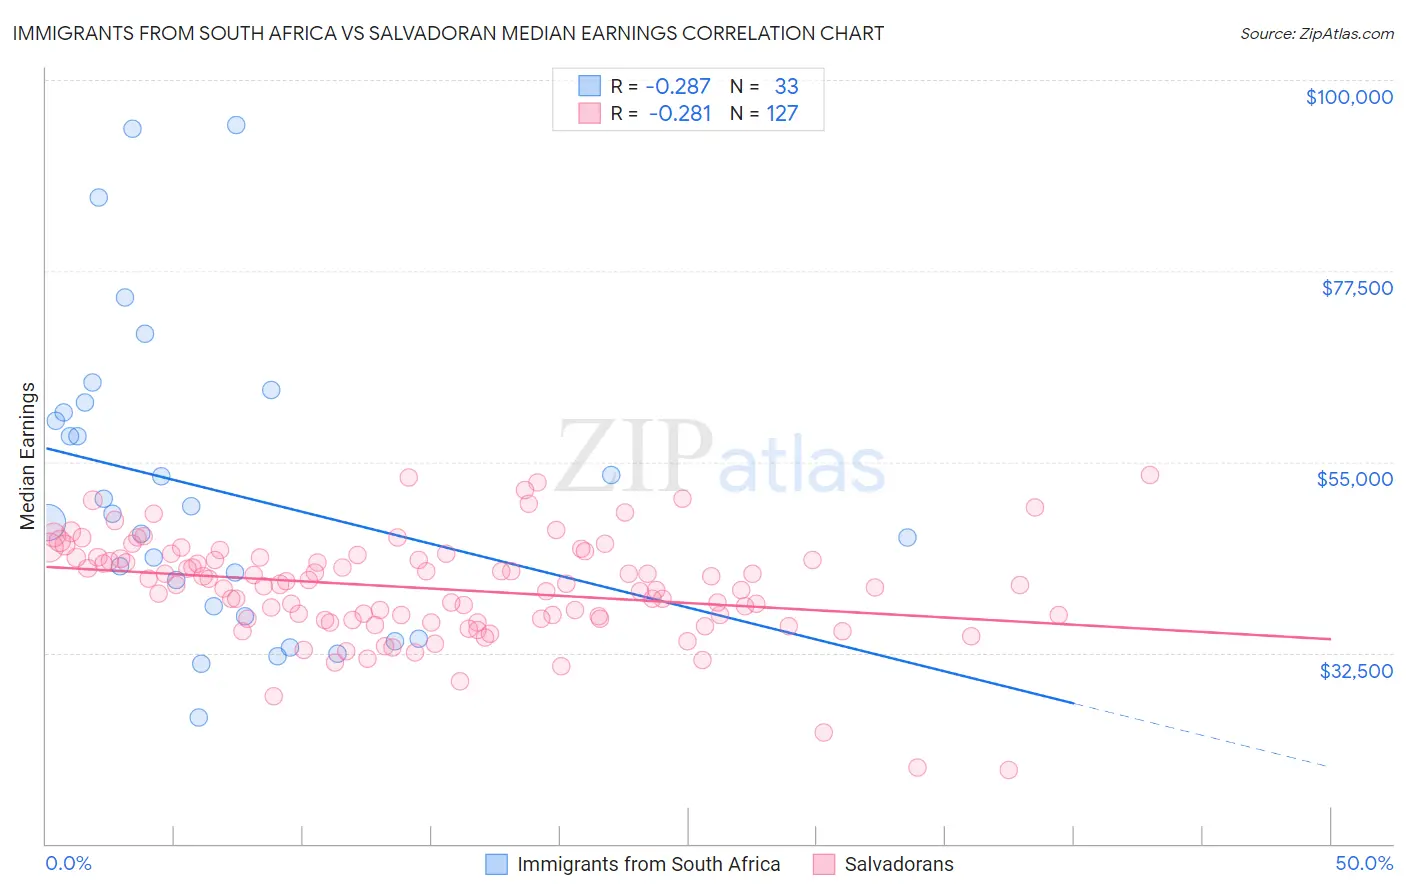 Immigrants from South Africa vs Salvadoran Median Earnings